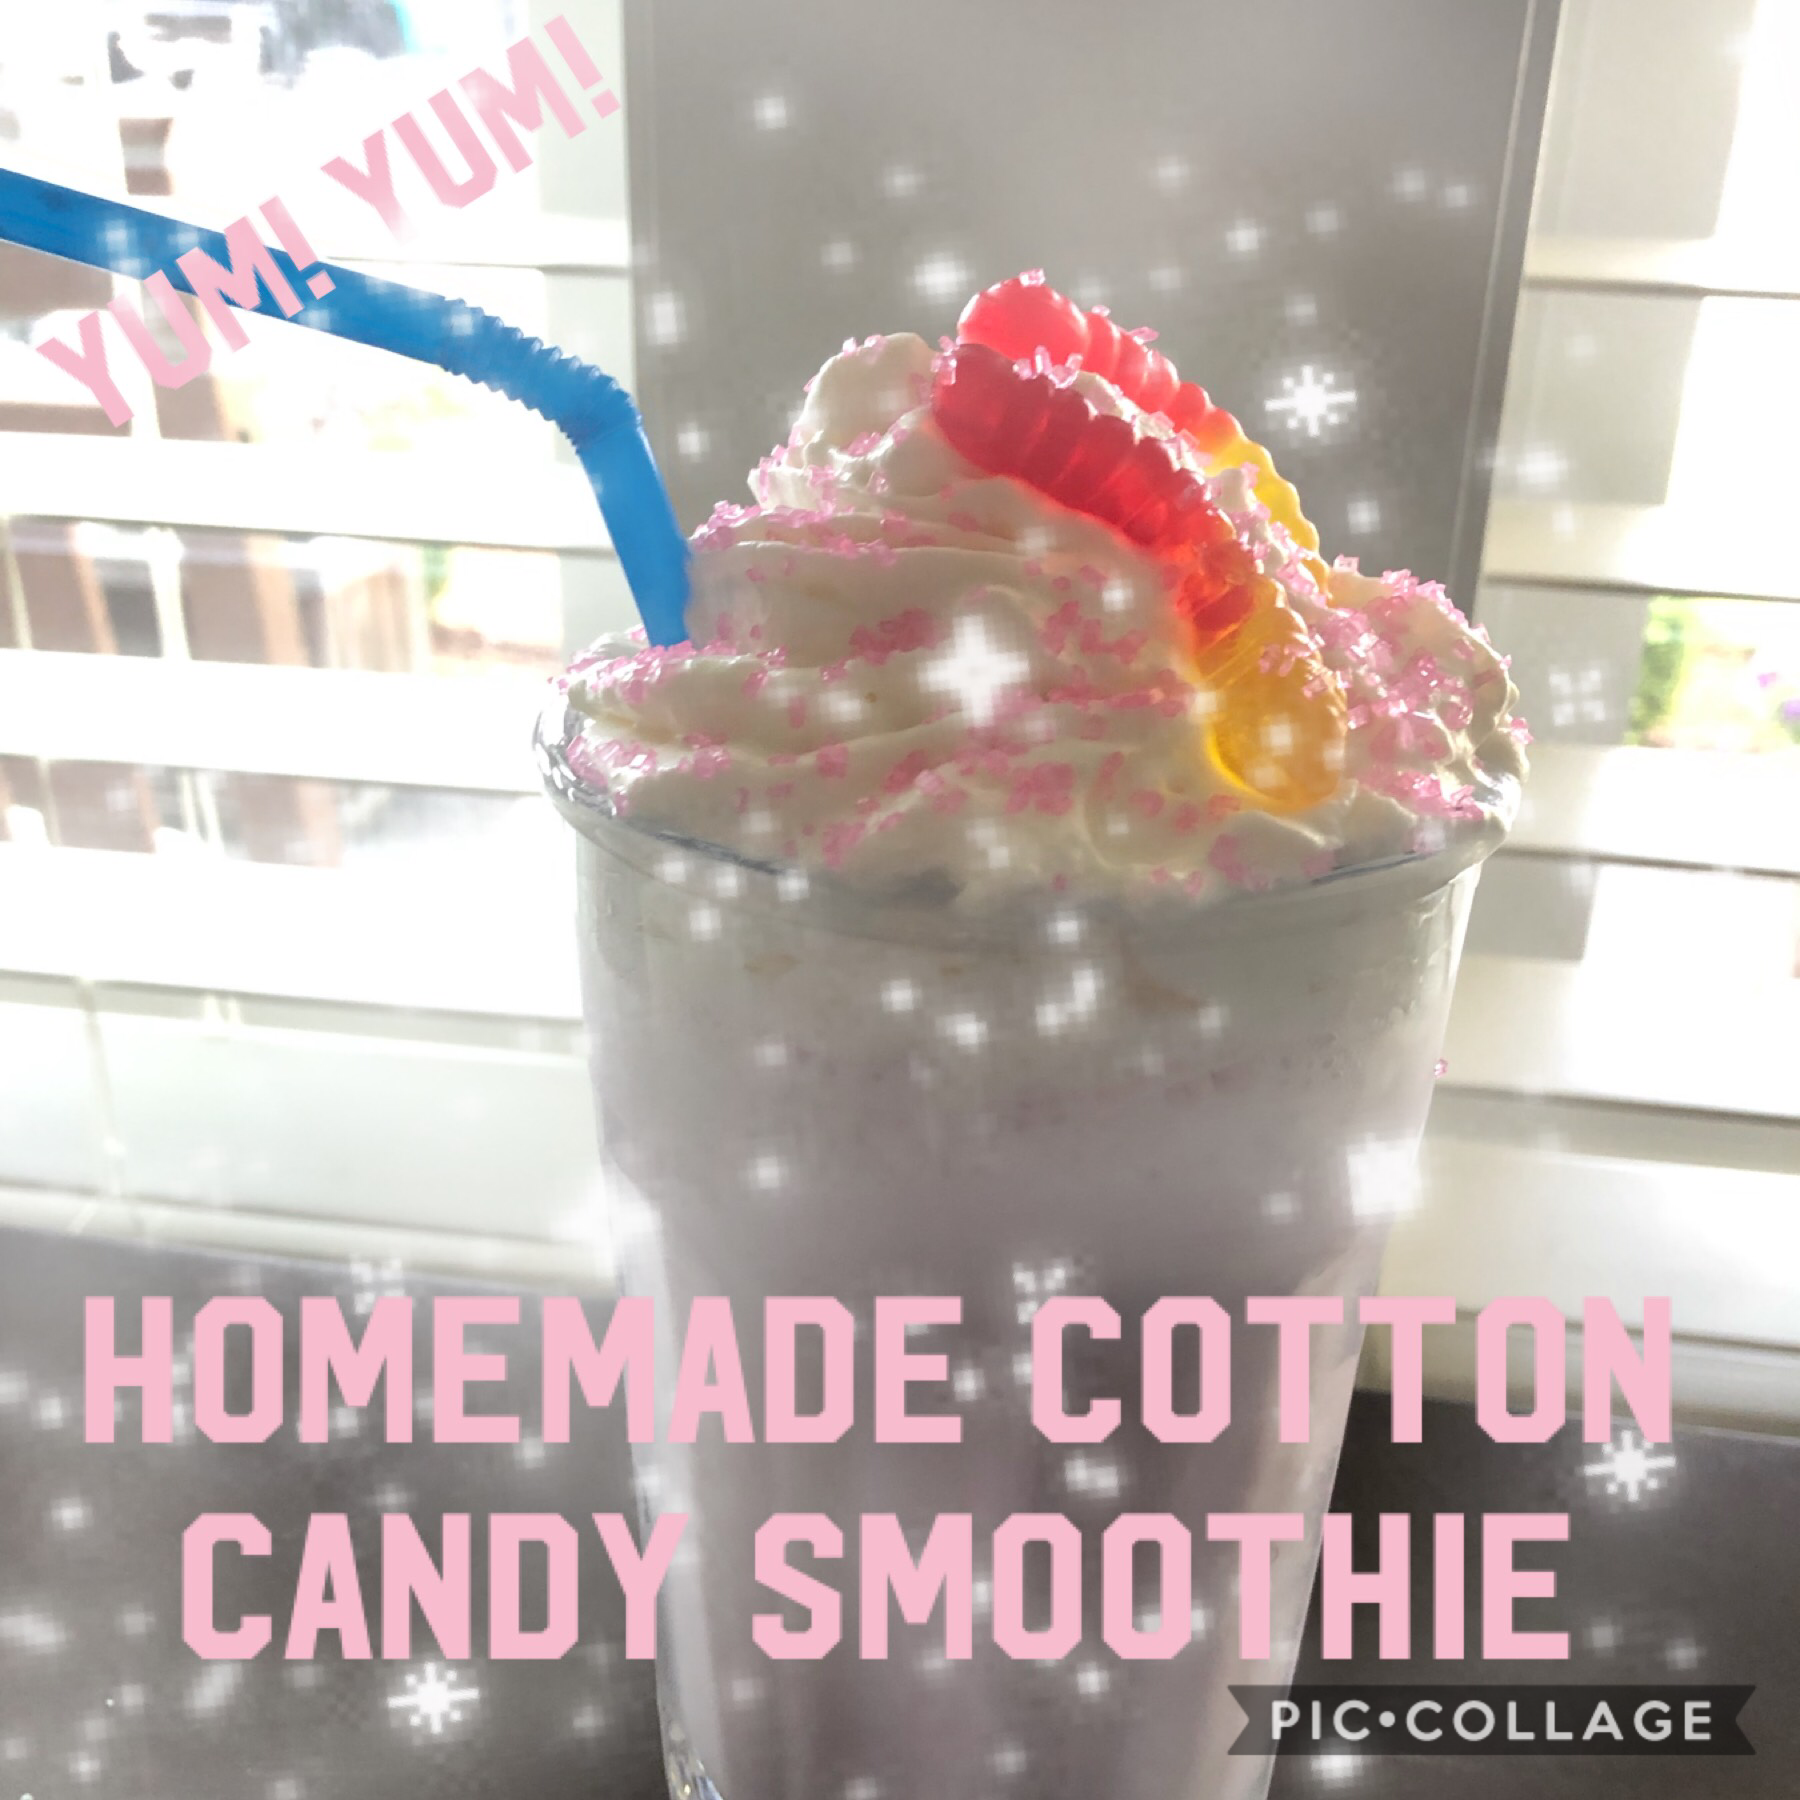 Cotton Candy Smoothie!
•add cotton candy ice cream to the blender
• add milk (optional)
•blend and put in cup
• add whipped cream and two gummy worms
• add pink sprinkles and a blue straw and enjoy!!!
